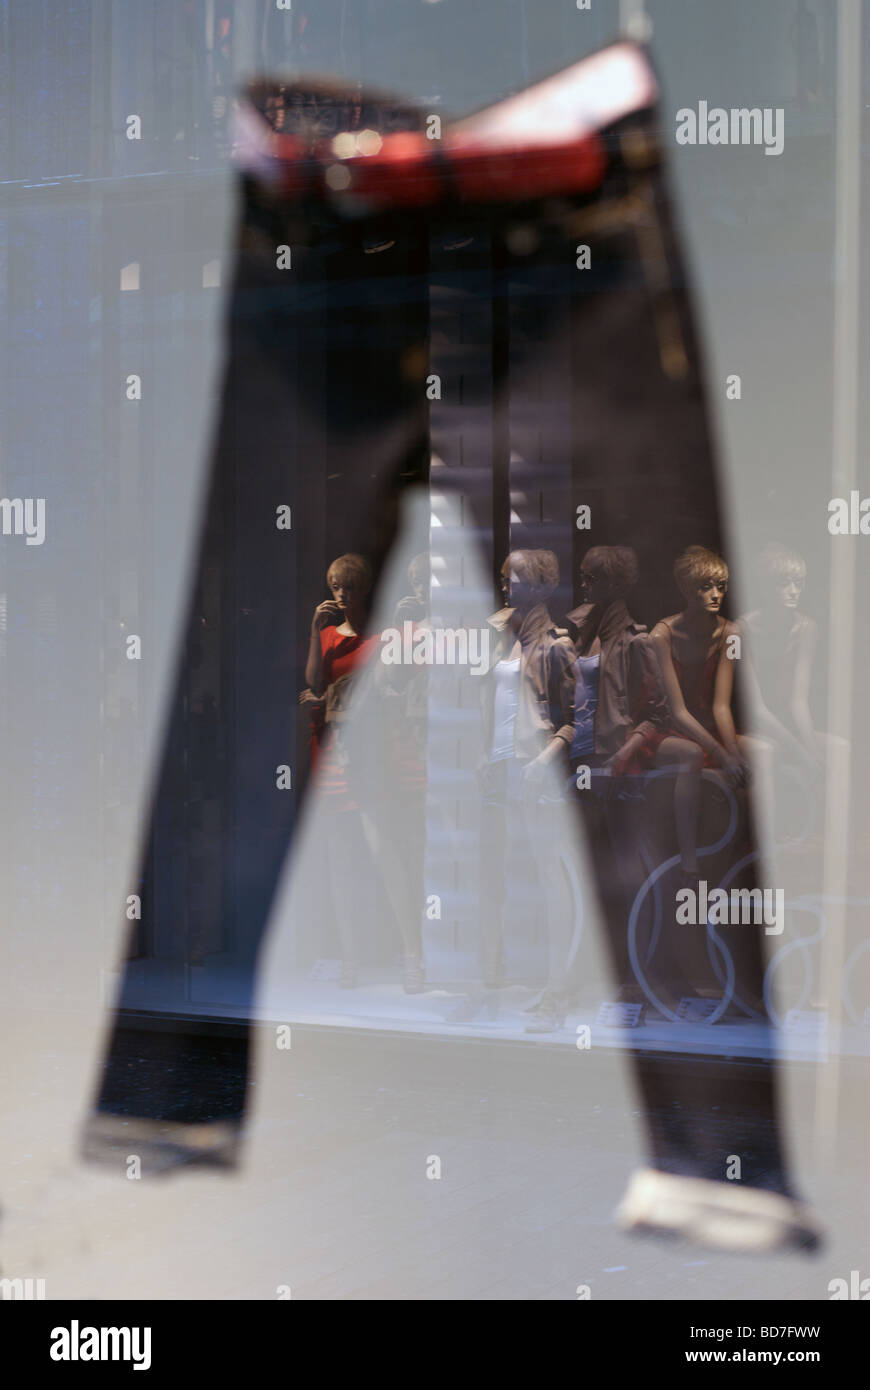 Ladies jeans on display at a shop in Dusseldorf, Germany Stock Photo - Alamy